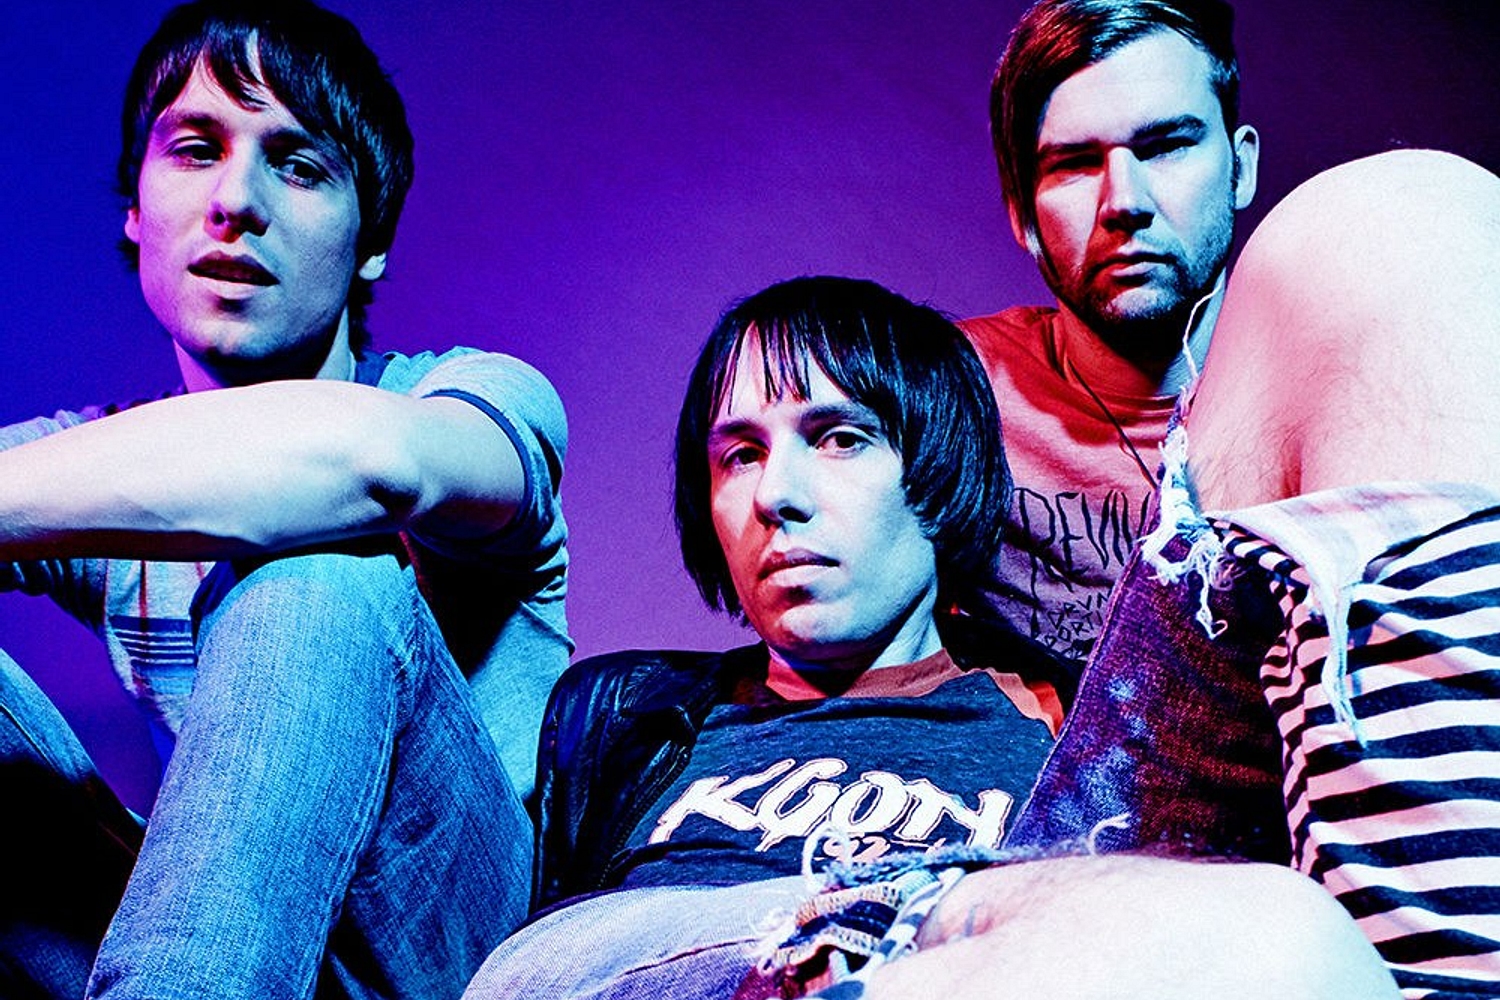 The Cribs unveil new track ‘Year of Hate’